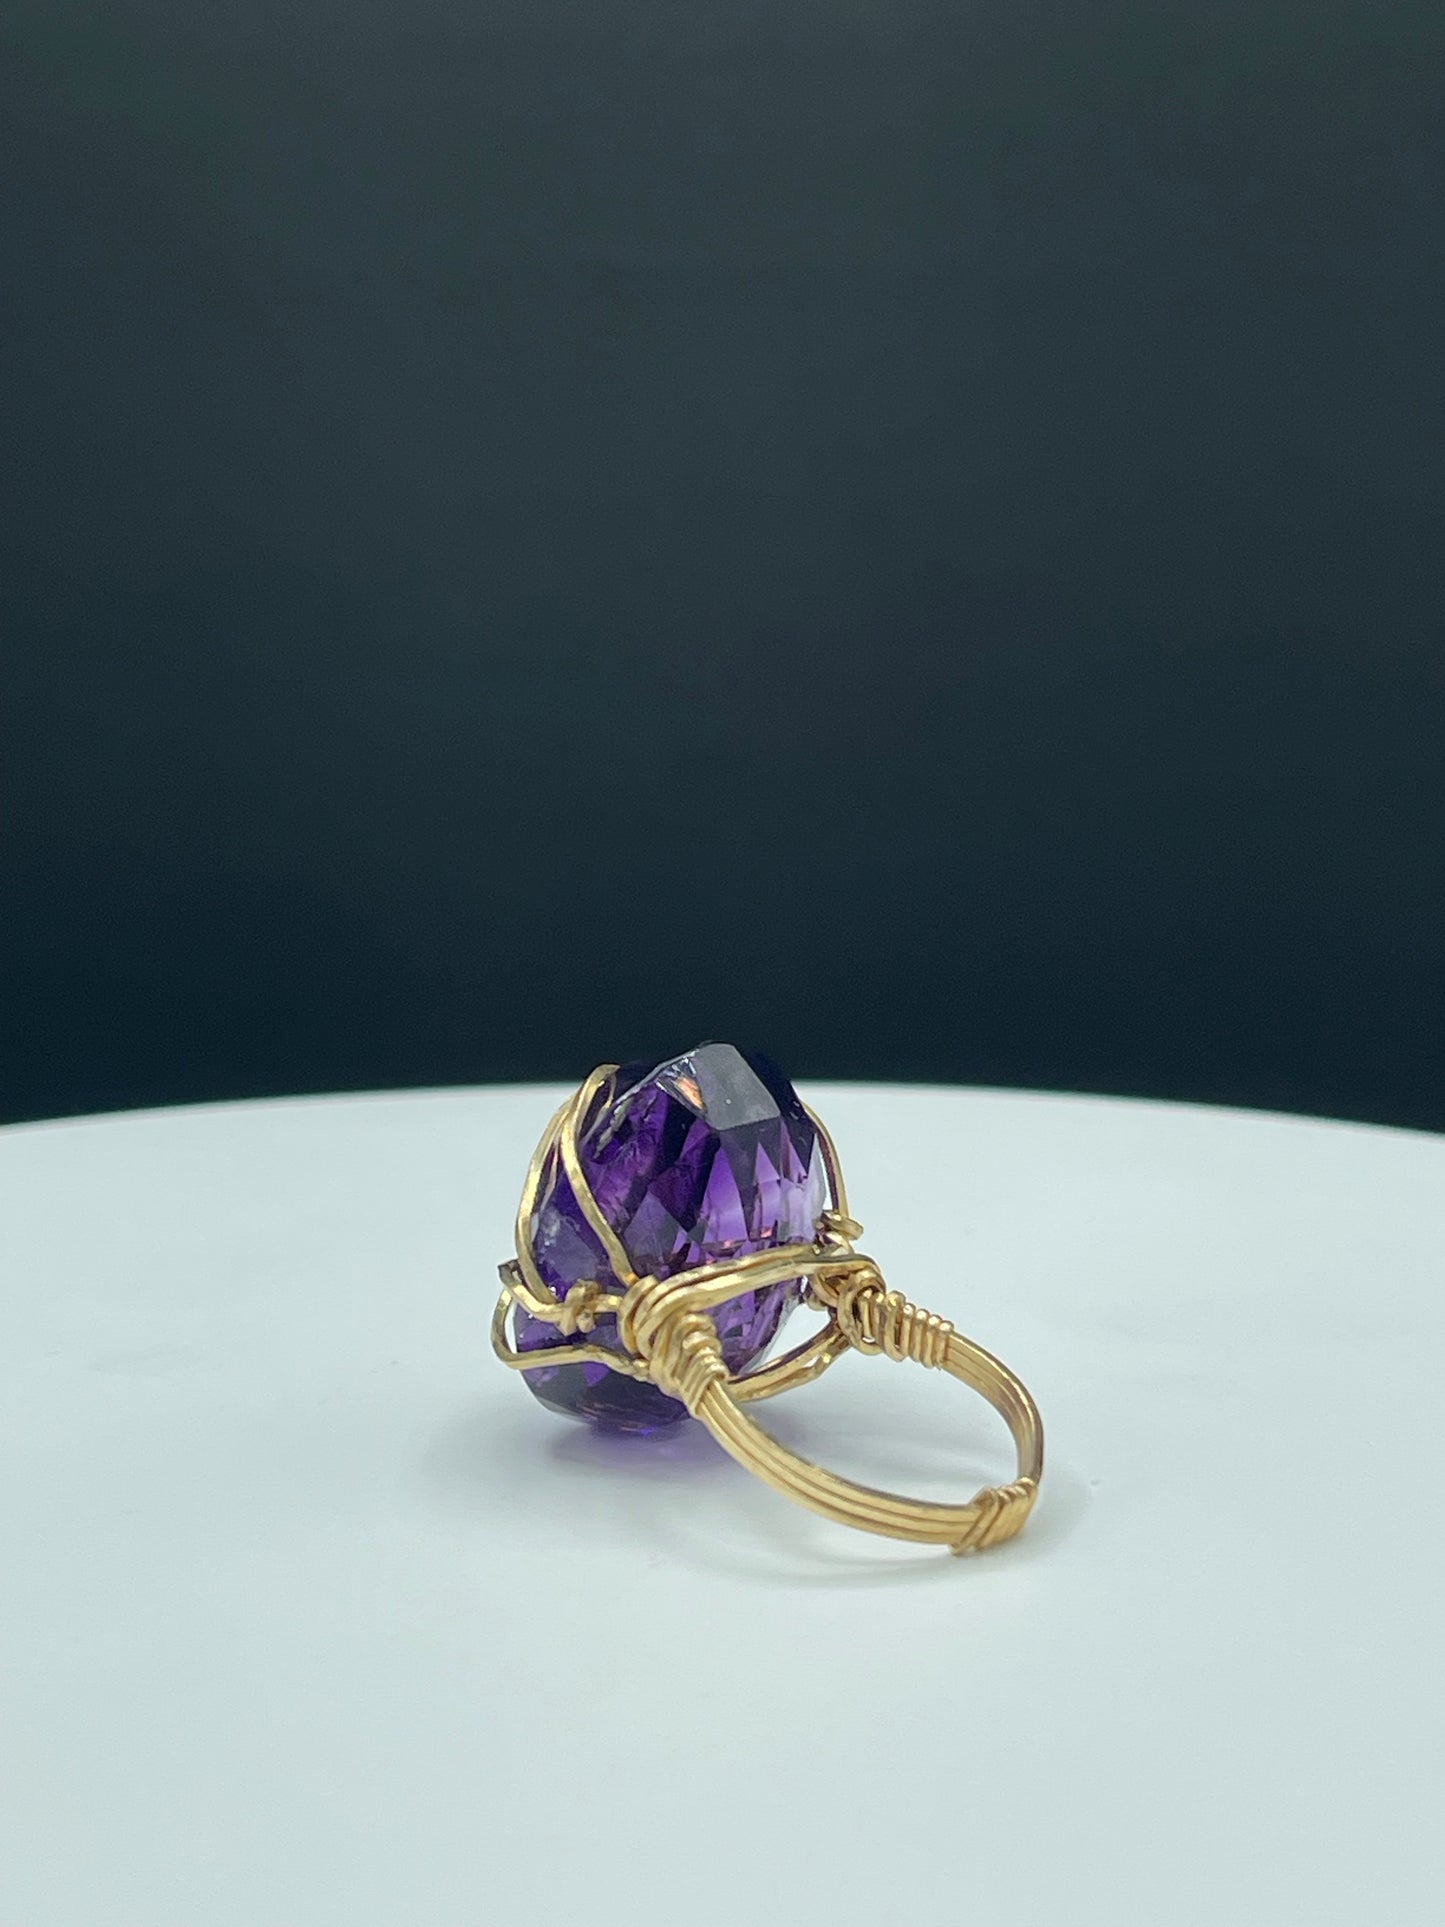 33.31 Carat Natural Zambian Amethyst 14k Gold Filled Wire Wrapped Ring (Size 7)